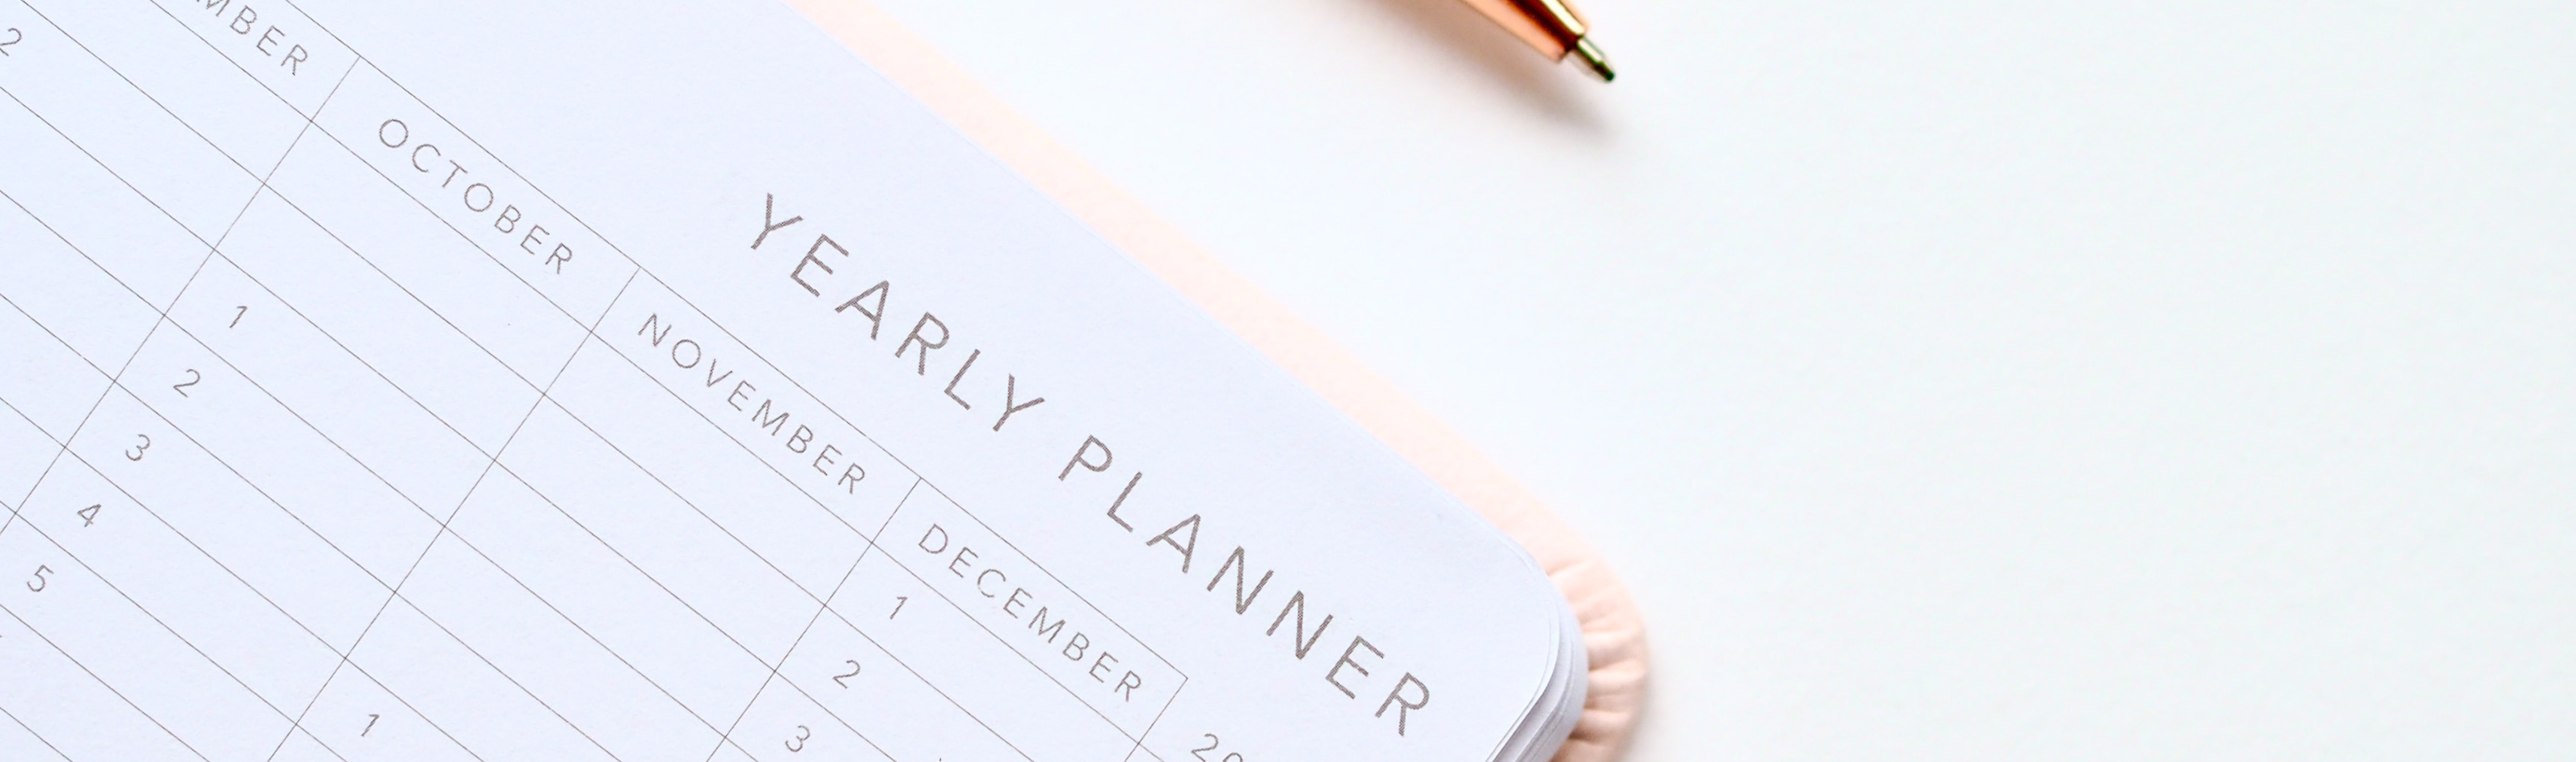 a yearly planner open on a white background